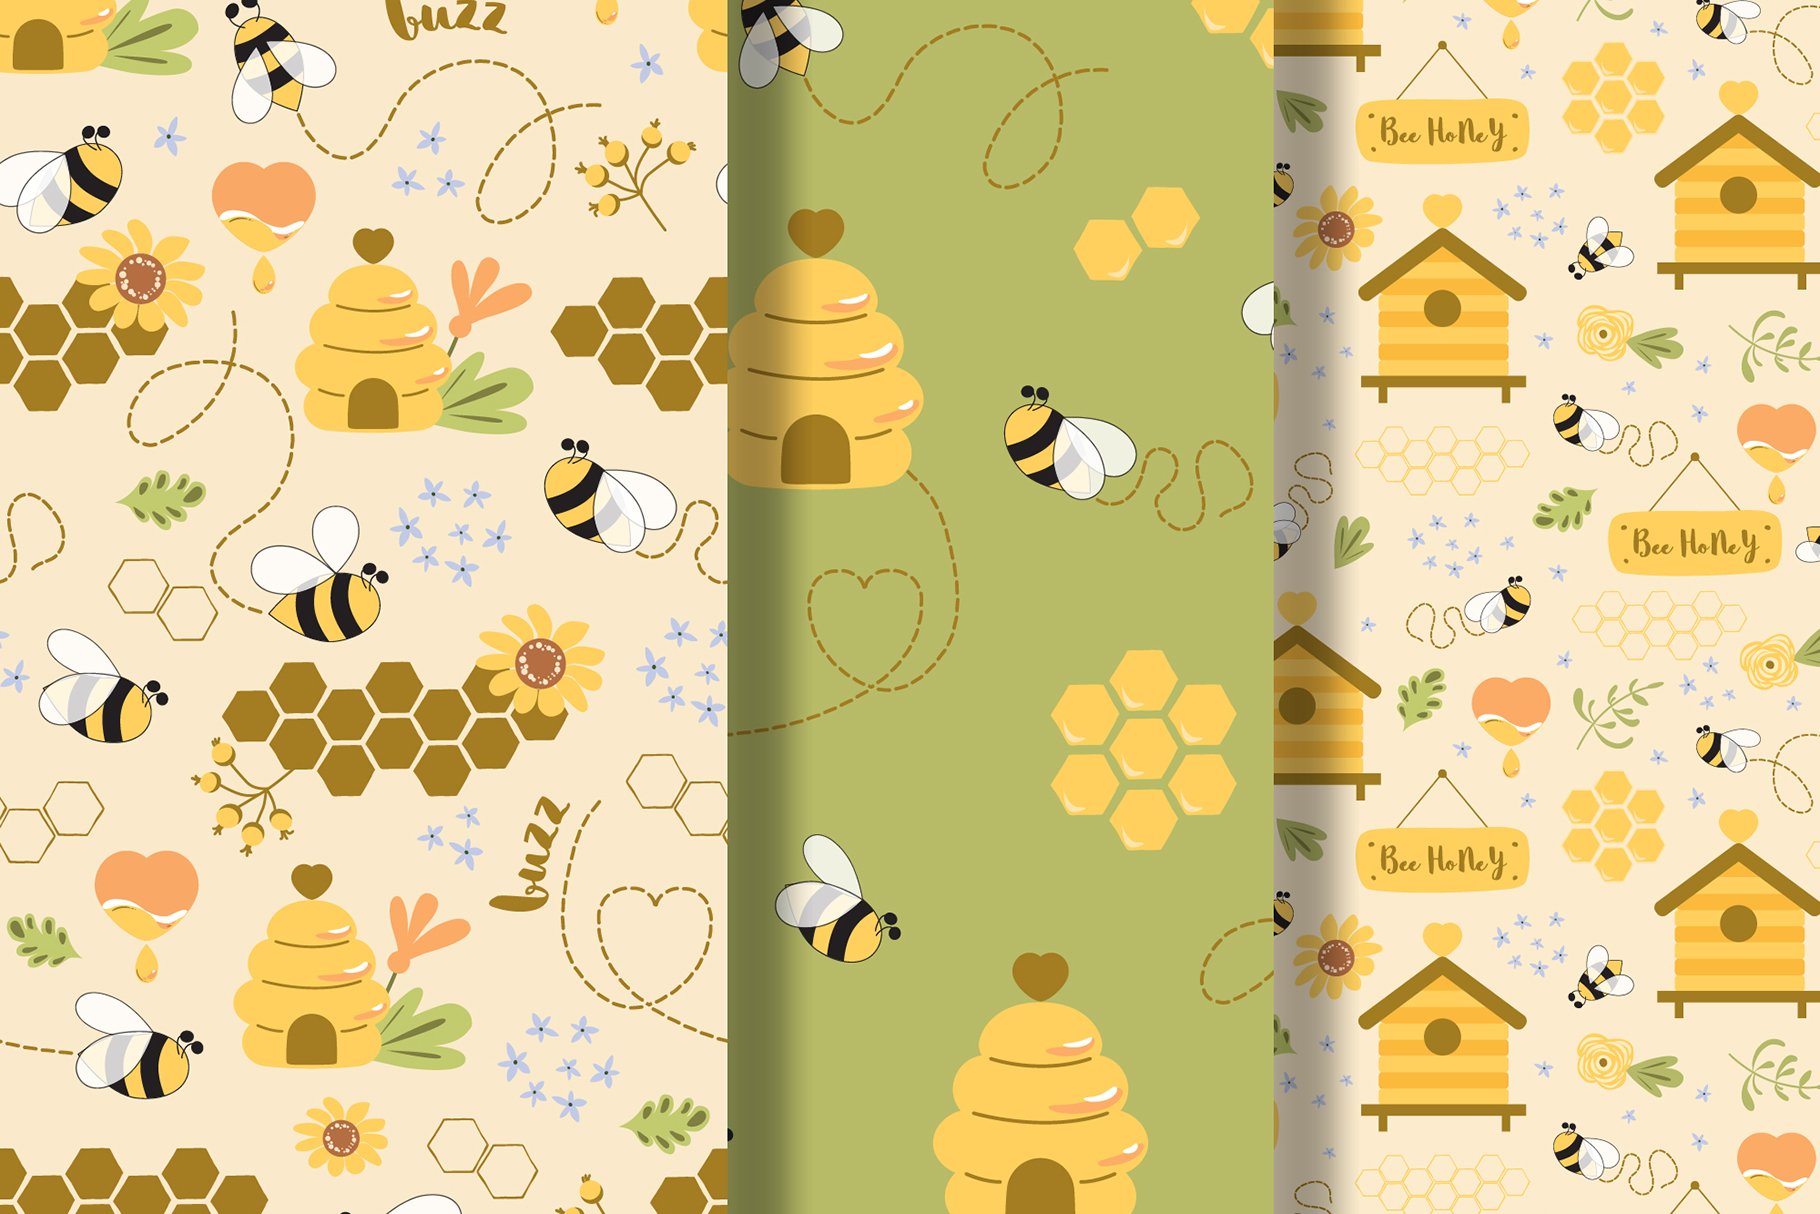 Full bee composition.